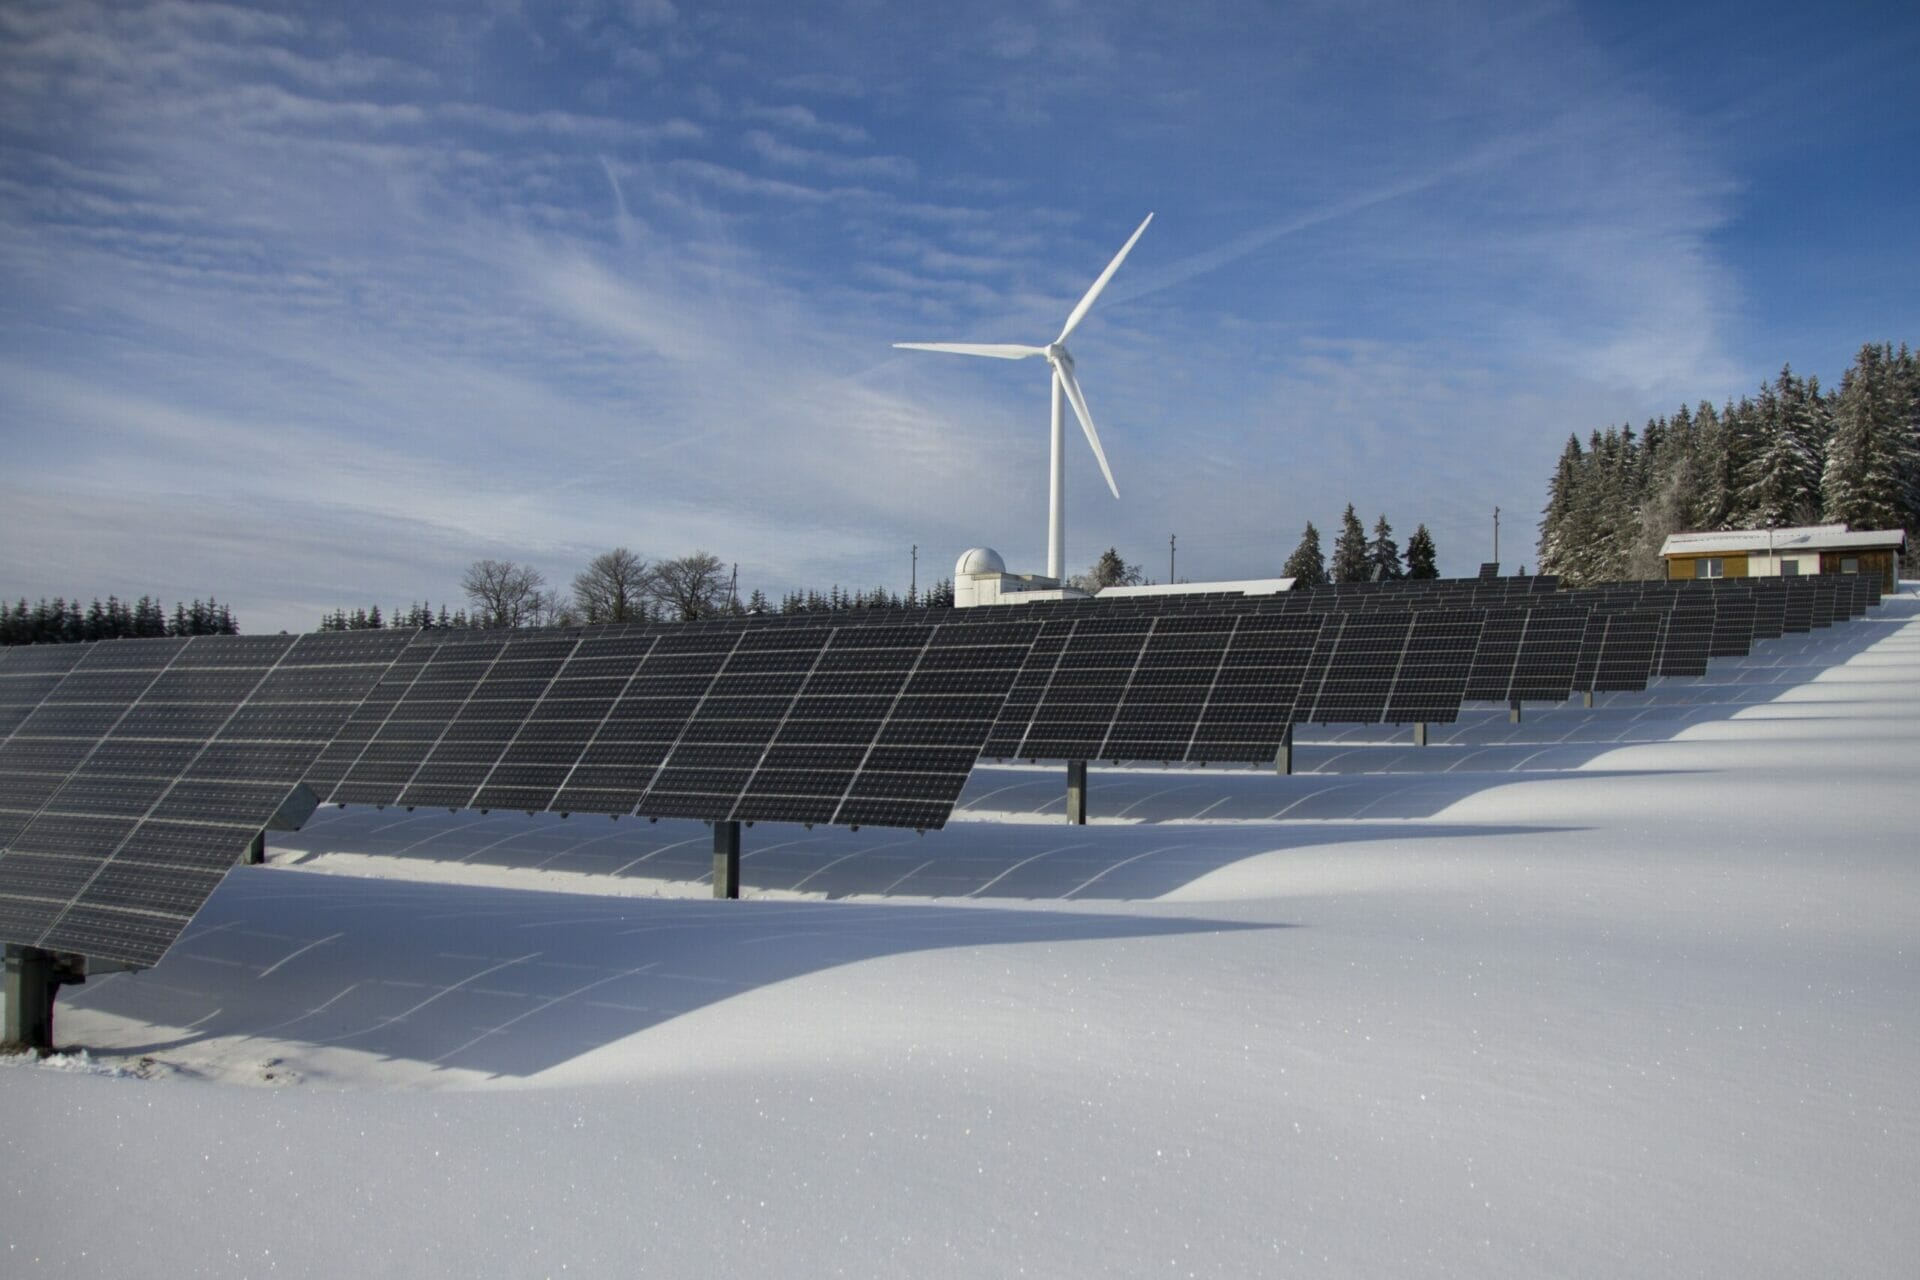 Snow covered hill, foreground solar panel farm, wind turbine in background